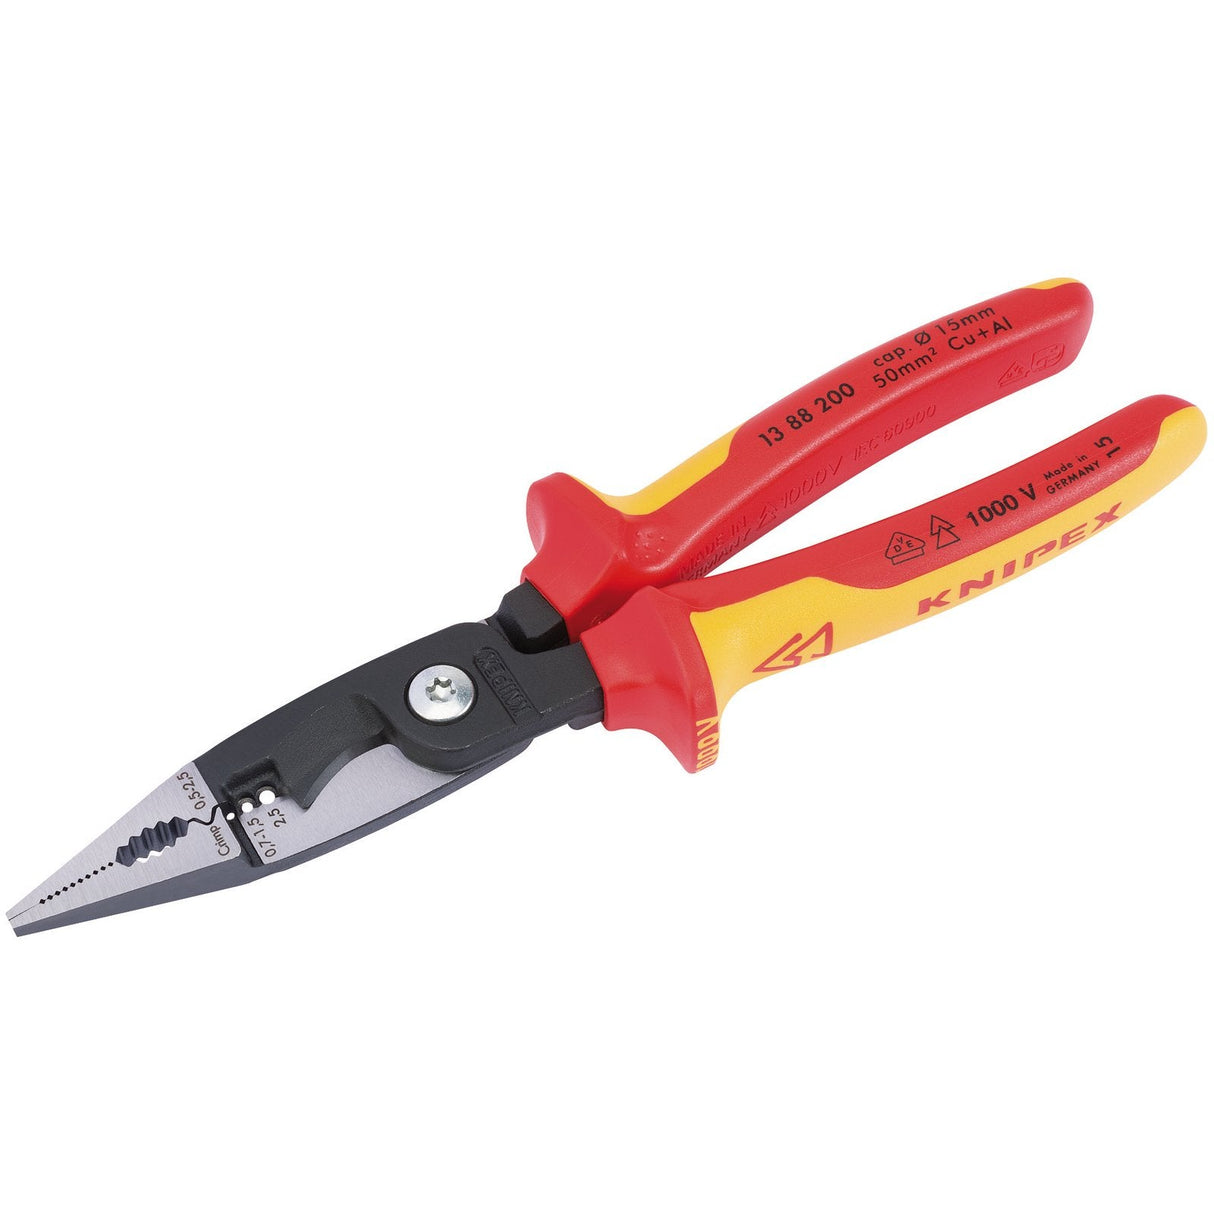 Draper Knipex 13 88 200Uksbe Fully Insulated Electricians Universal Installation Pliers, 200mm - 13 88 200 UKSBE - Farming Parts